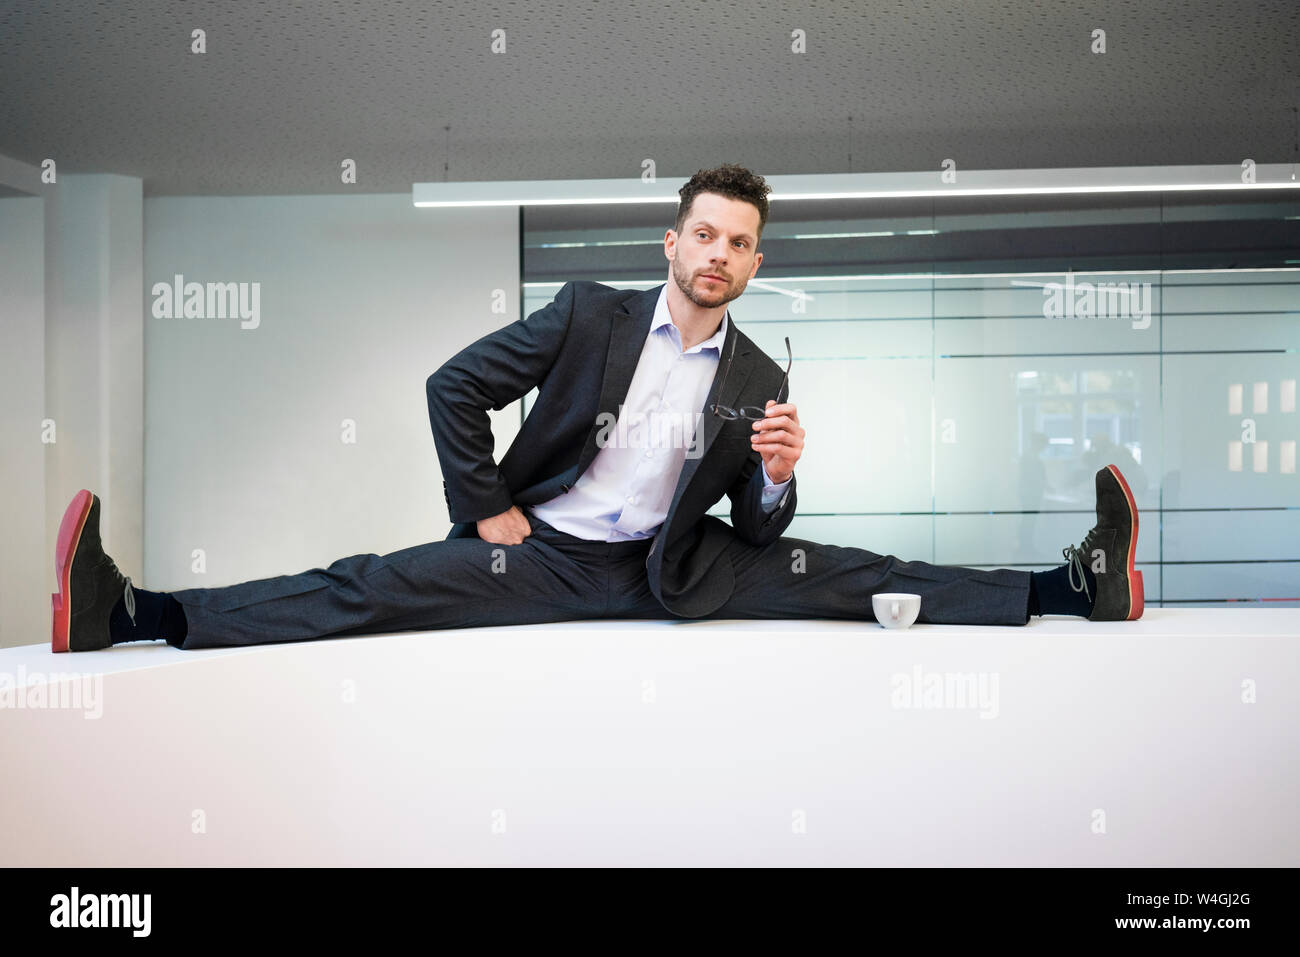 Businessman doing the splits on reception desk in office Stock Photo